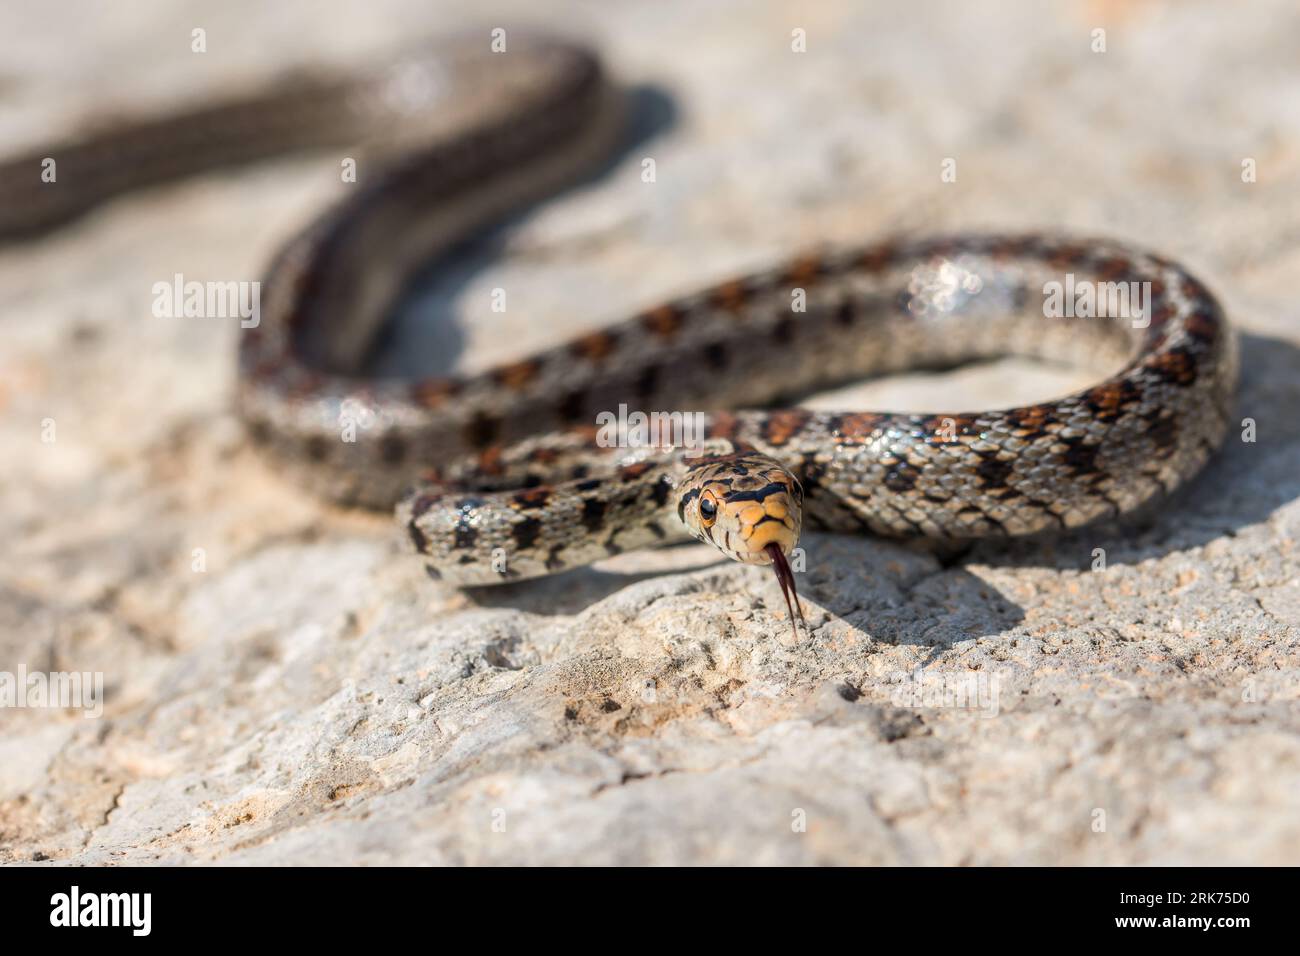 Macro shot of body, skin and head of an adult Leopard Snake or European ratsnake, Zamenis situla, an endemic snake species in the Maltese Islands. Stock Photo